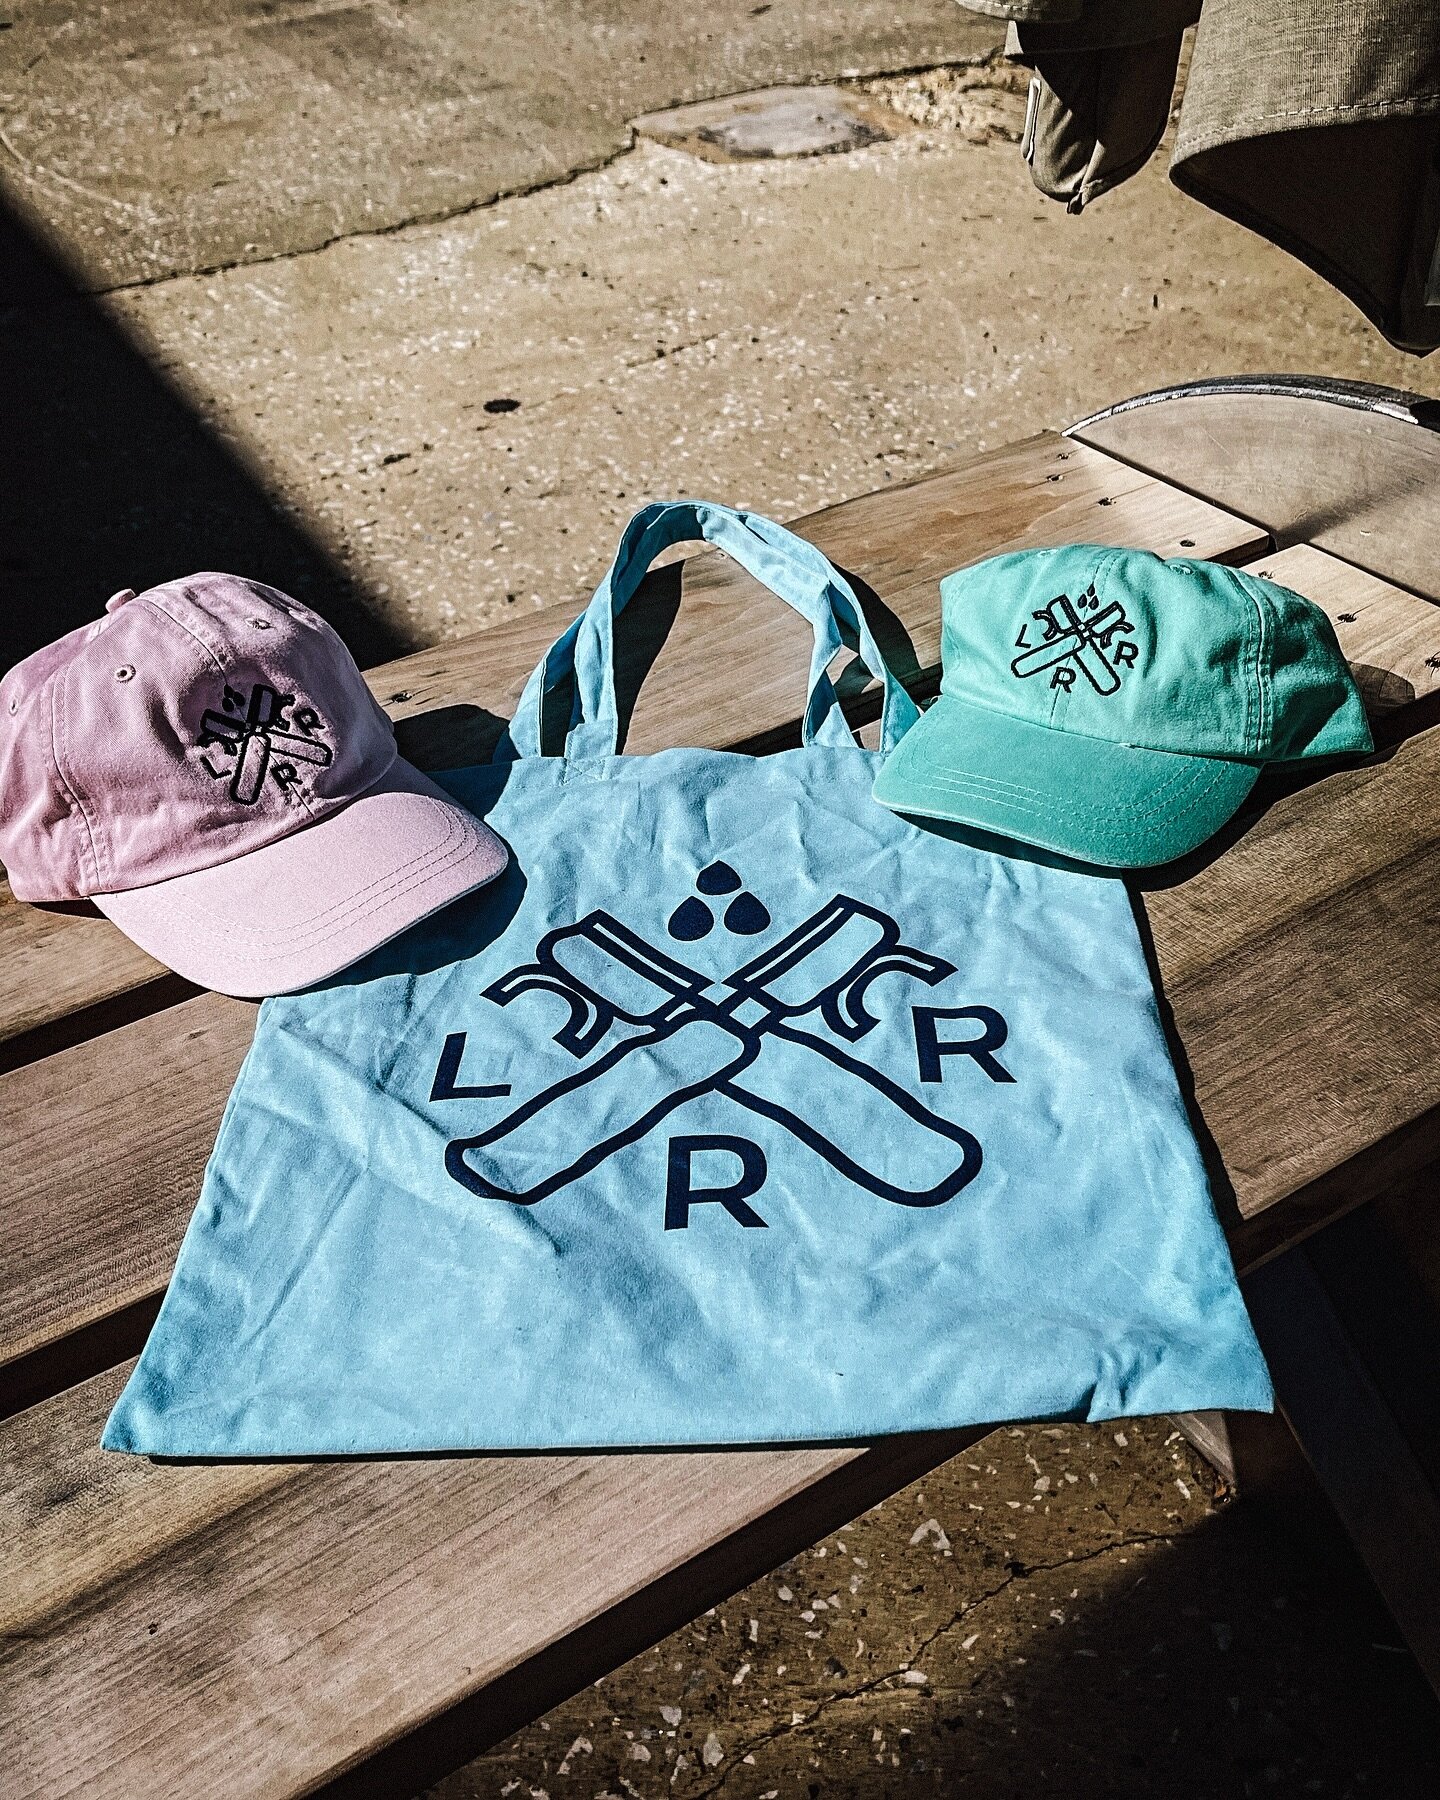 Little River Spring swag drop has dropped. Spring has sprung. Cliches have cliched.